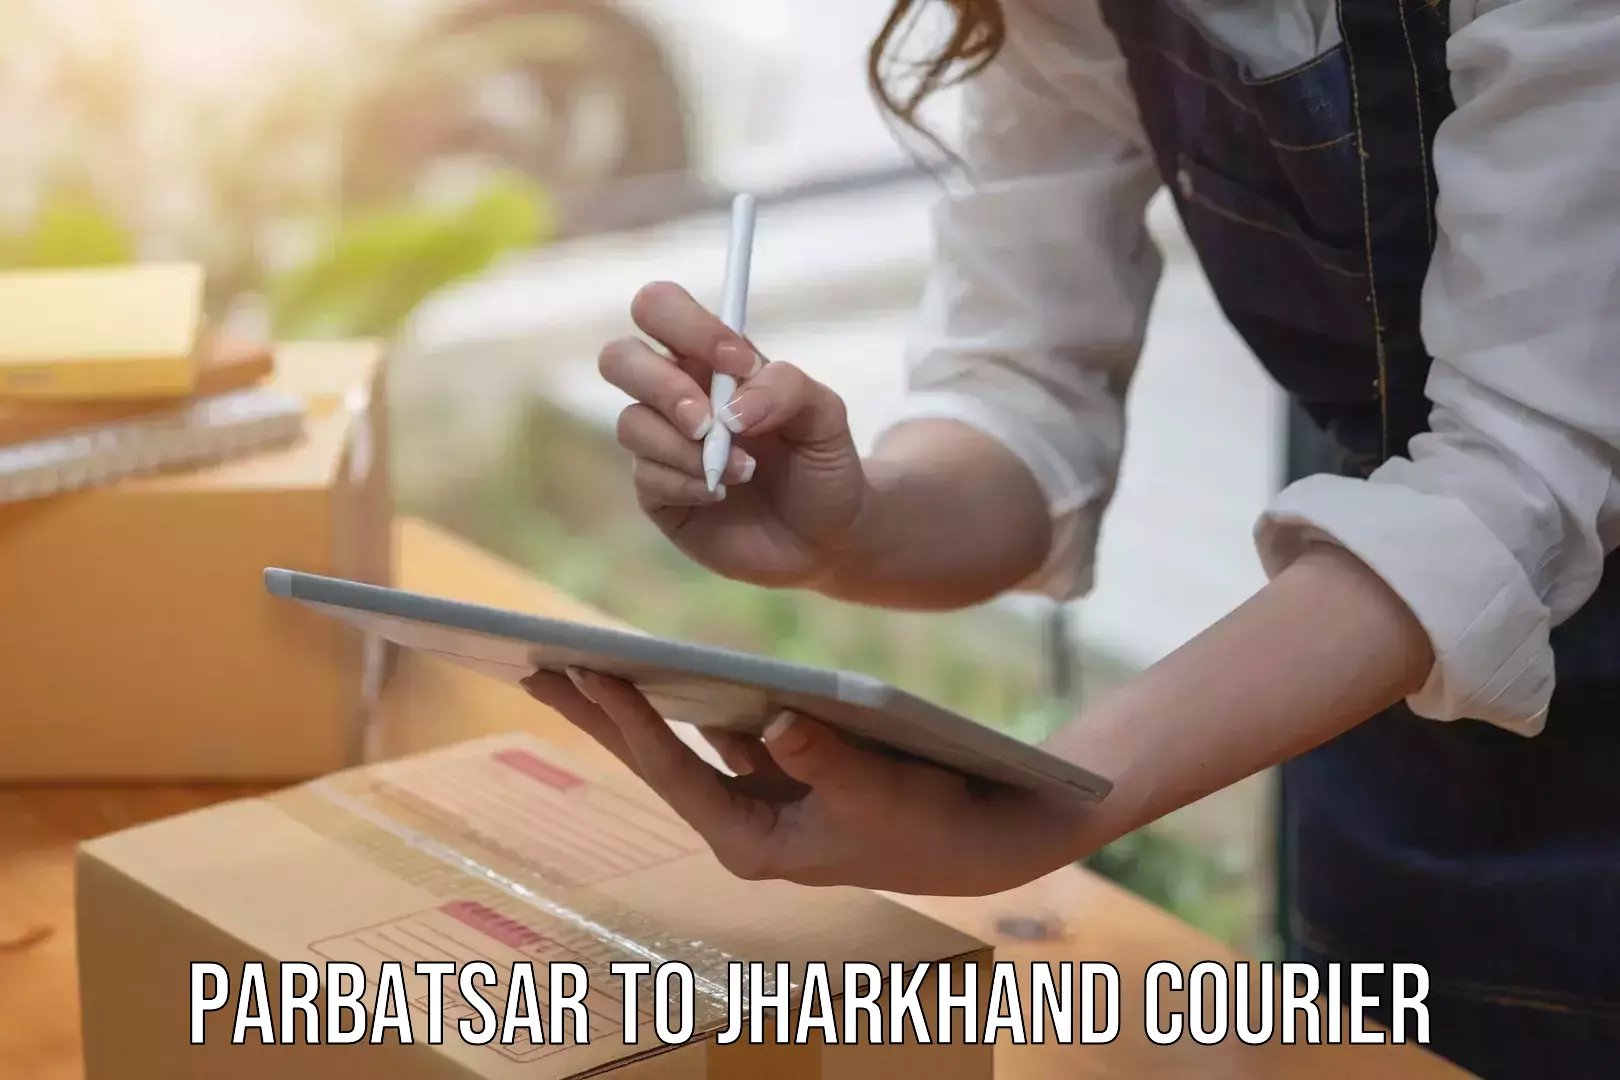 Global shipping networks Parbatsar to Jharkhand